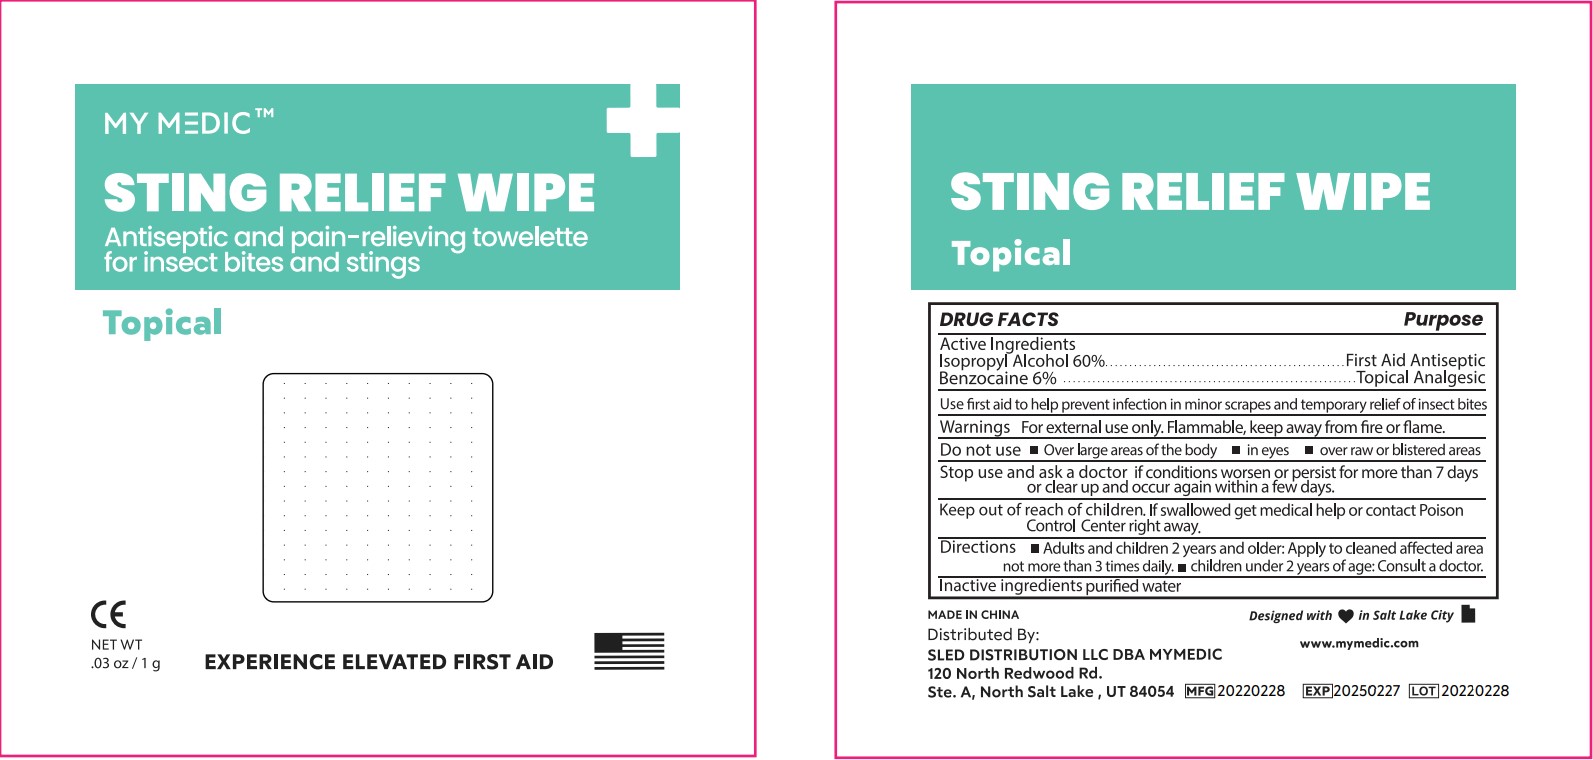 NDC 53439-120-10
Cut Care
Insect Bite Antiseptic & Pain Relieving Wipes
First aid antiseptic
Topical Analgesic
Contents: 100 Pre-Moistened Wipes
